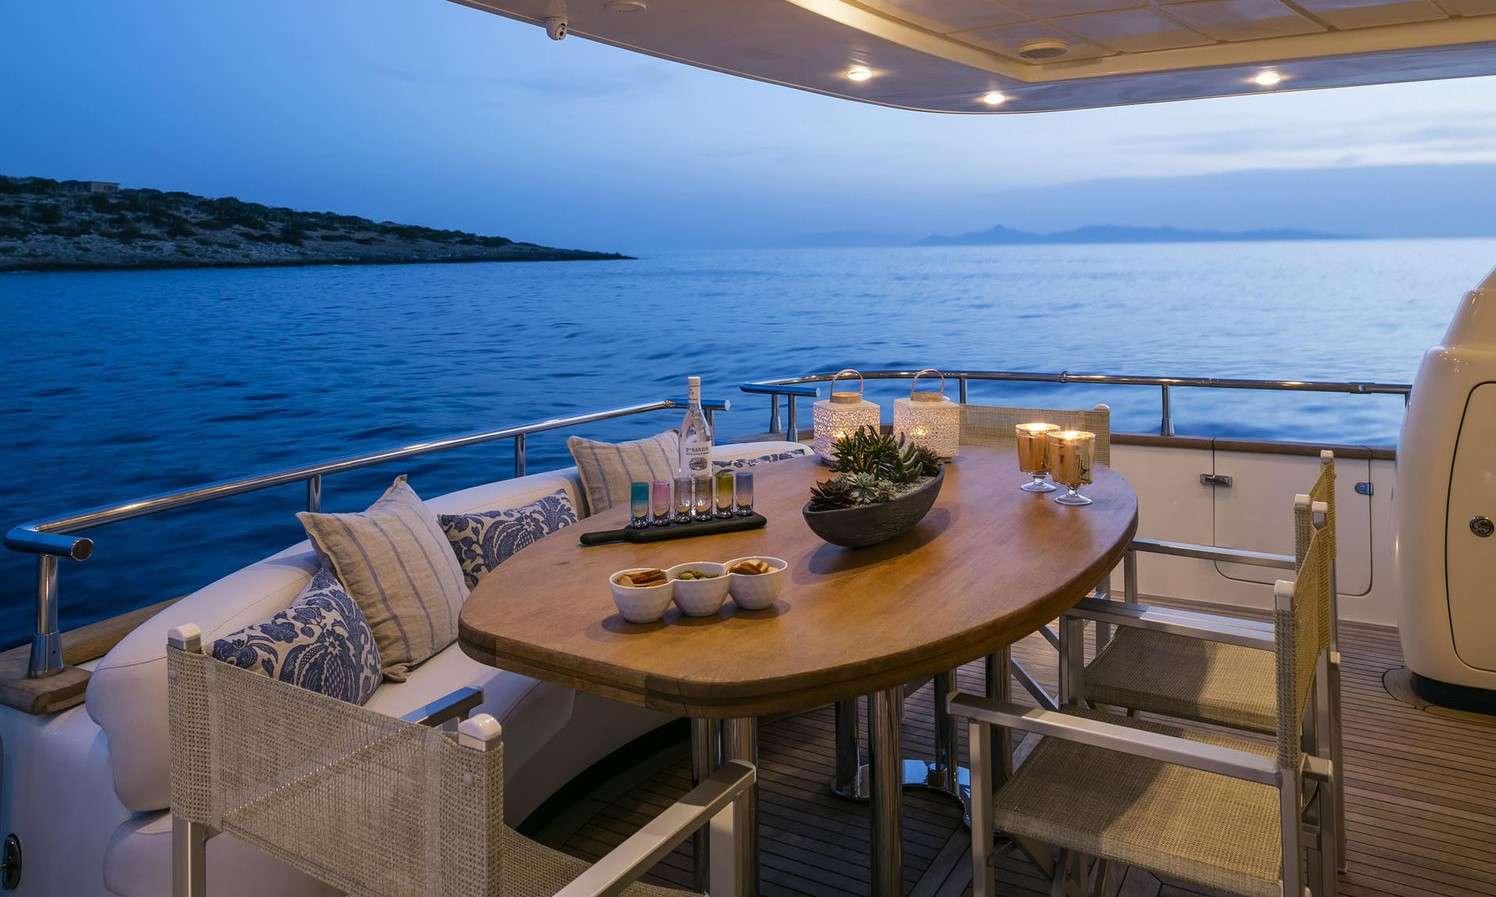 GORGEOUS Yacht Charter - Aft deck night view